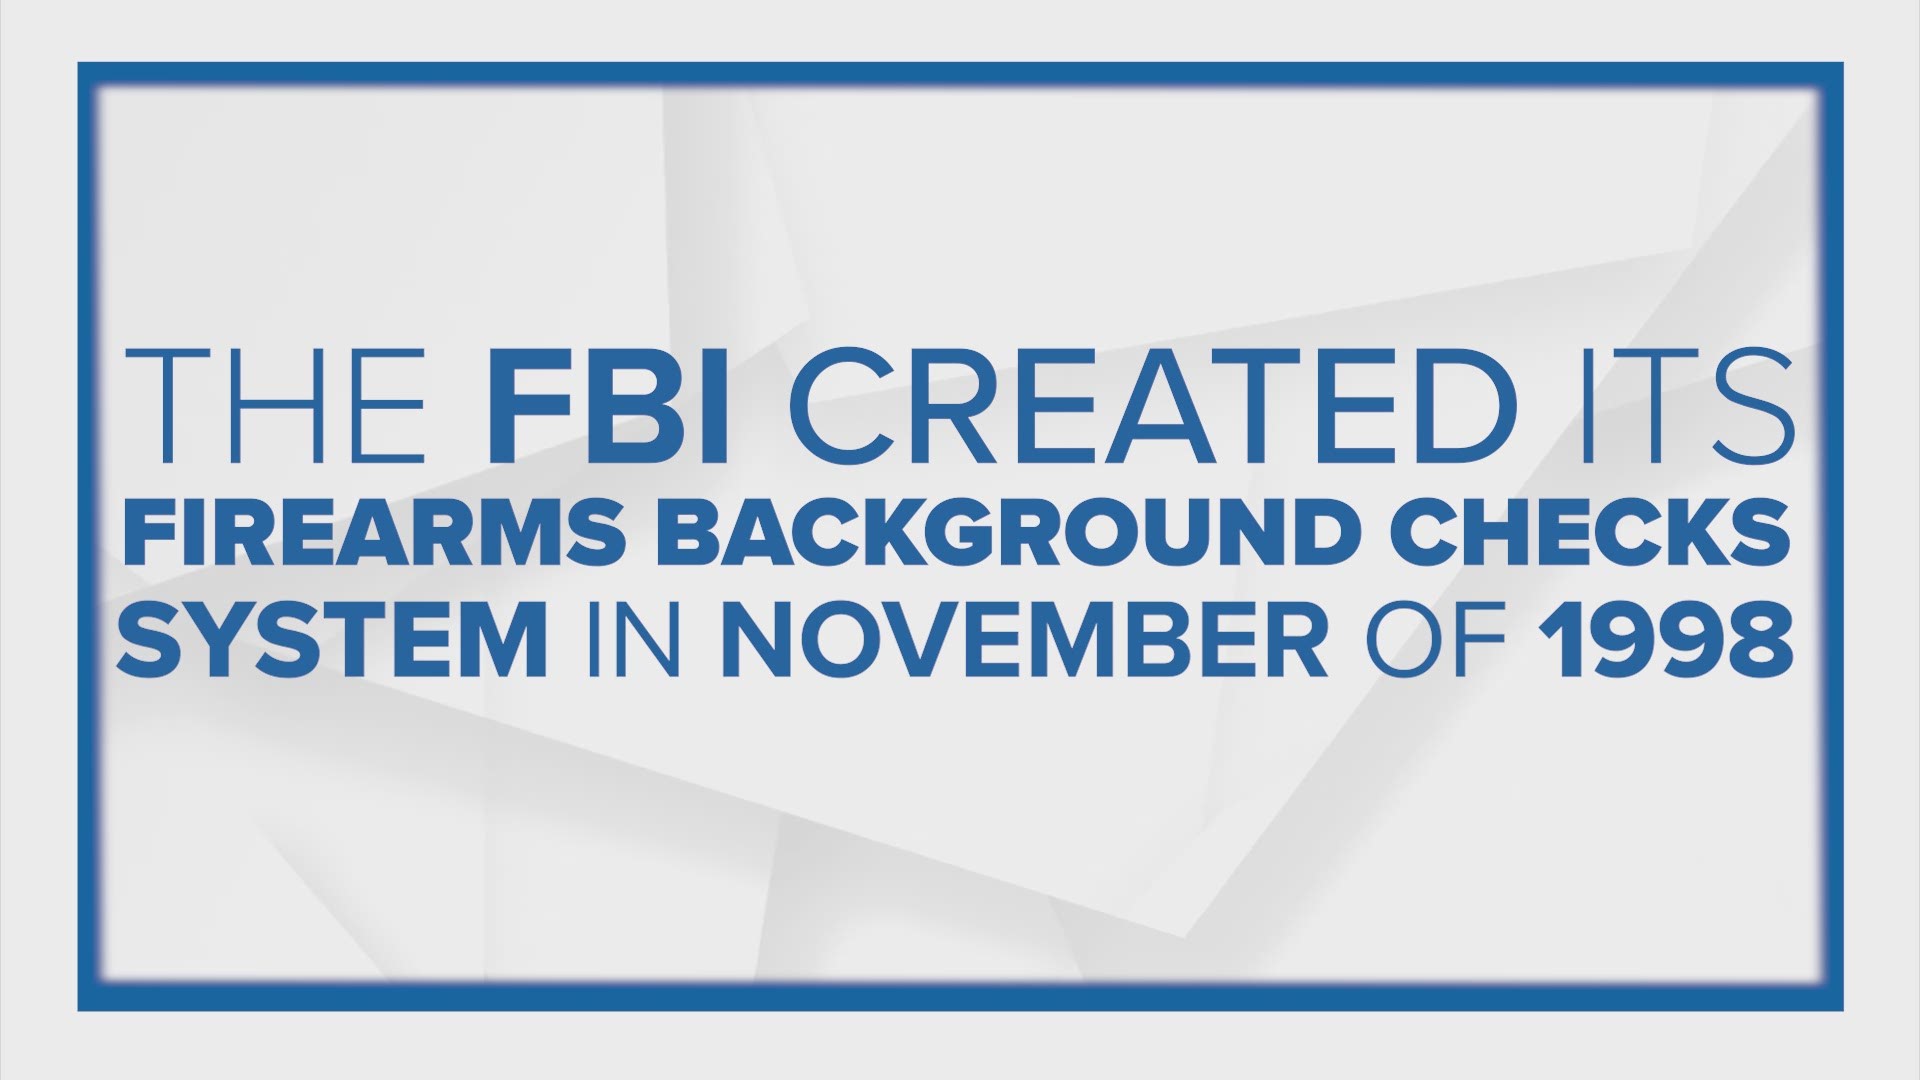 The FBI created its firearms background checks system in November of 1998. Through nine months in 2020, a new annual record number of background checks has been set.